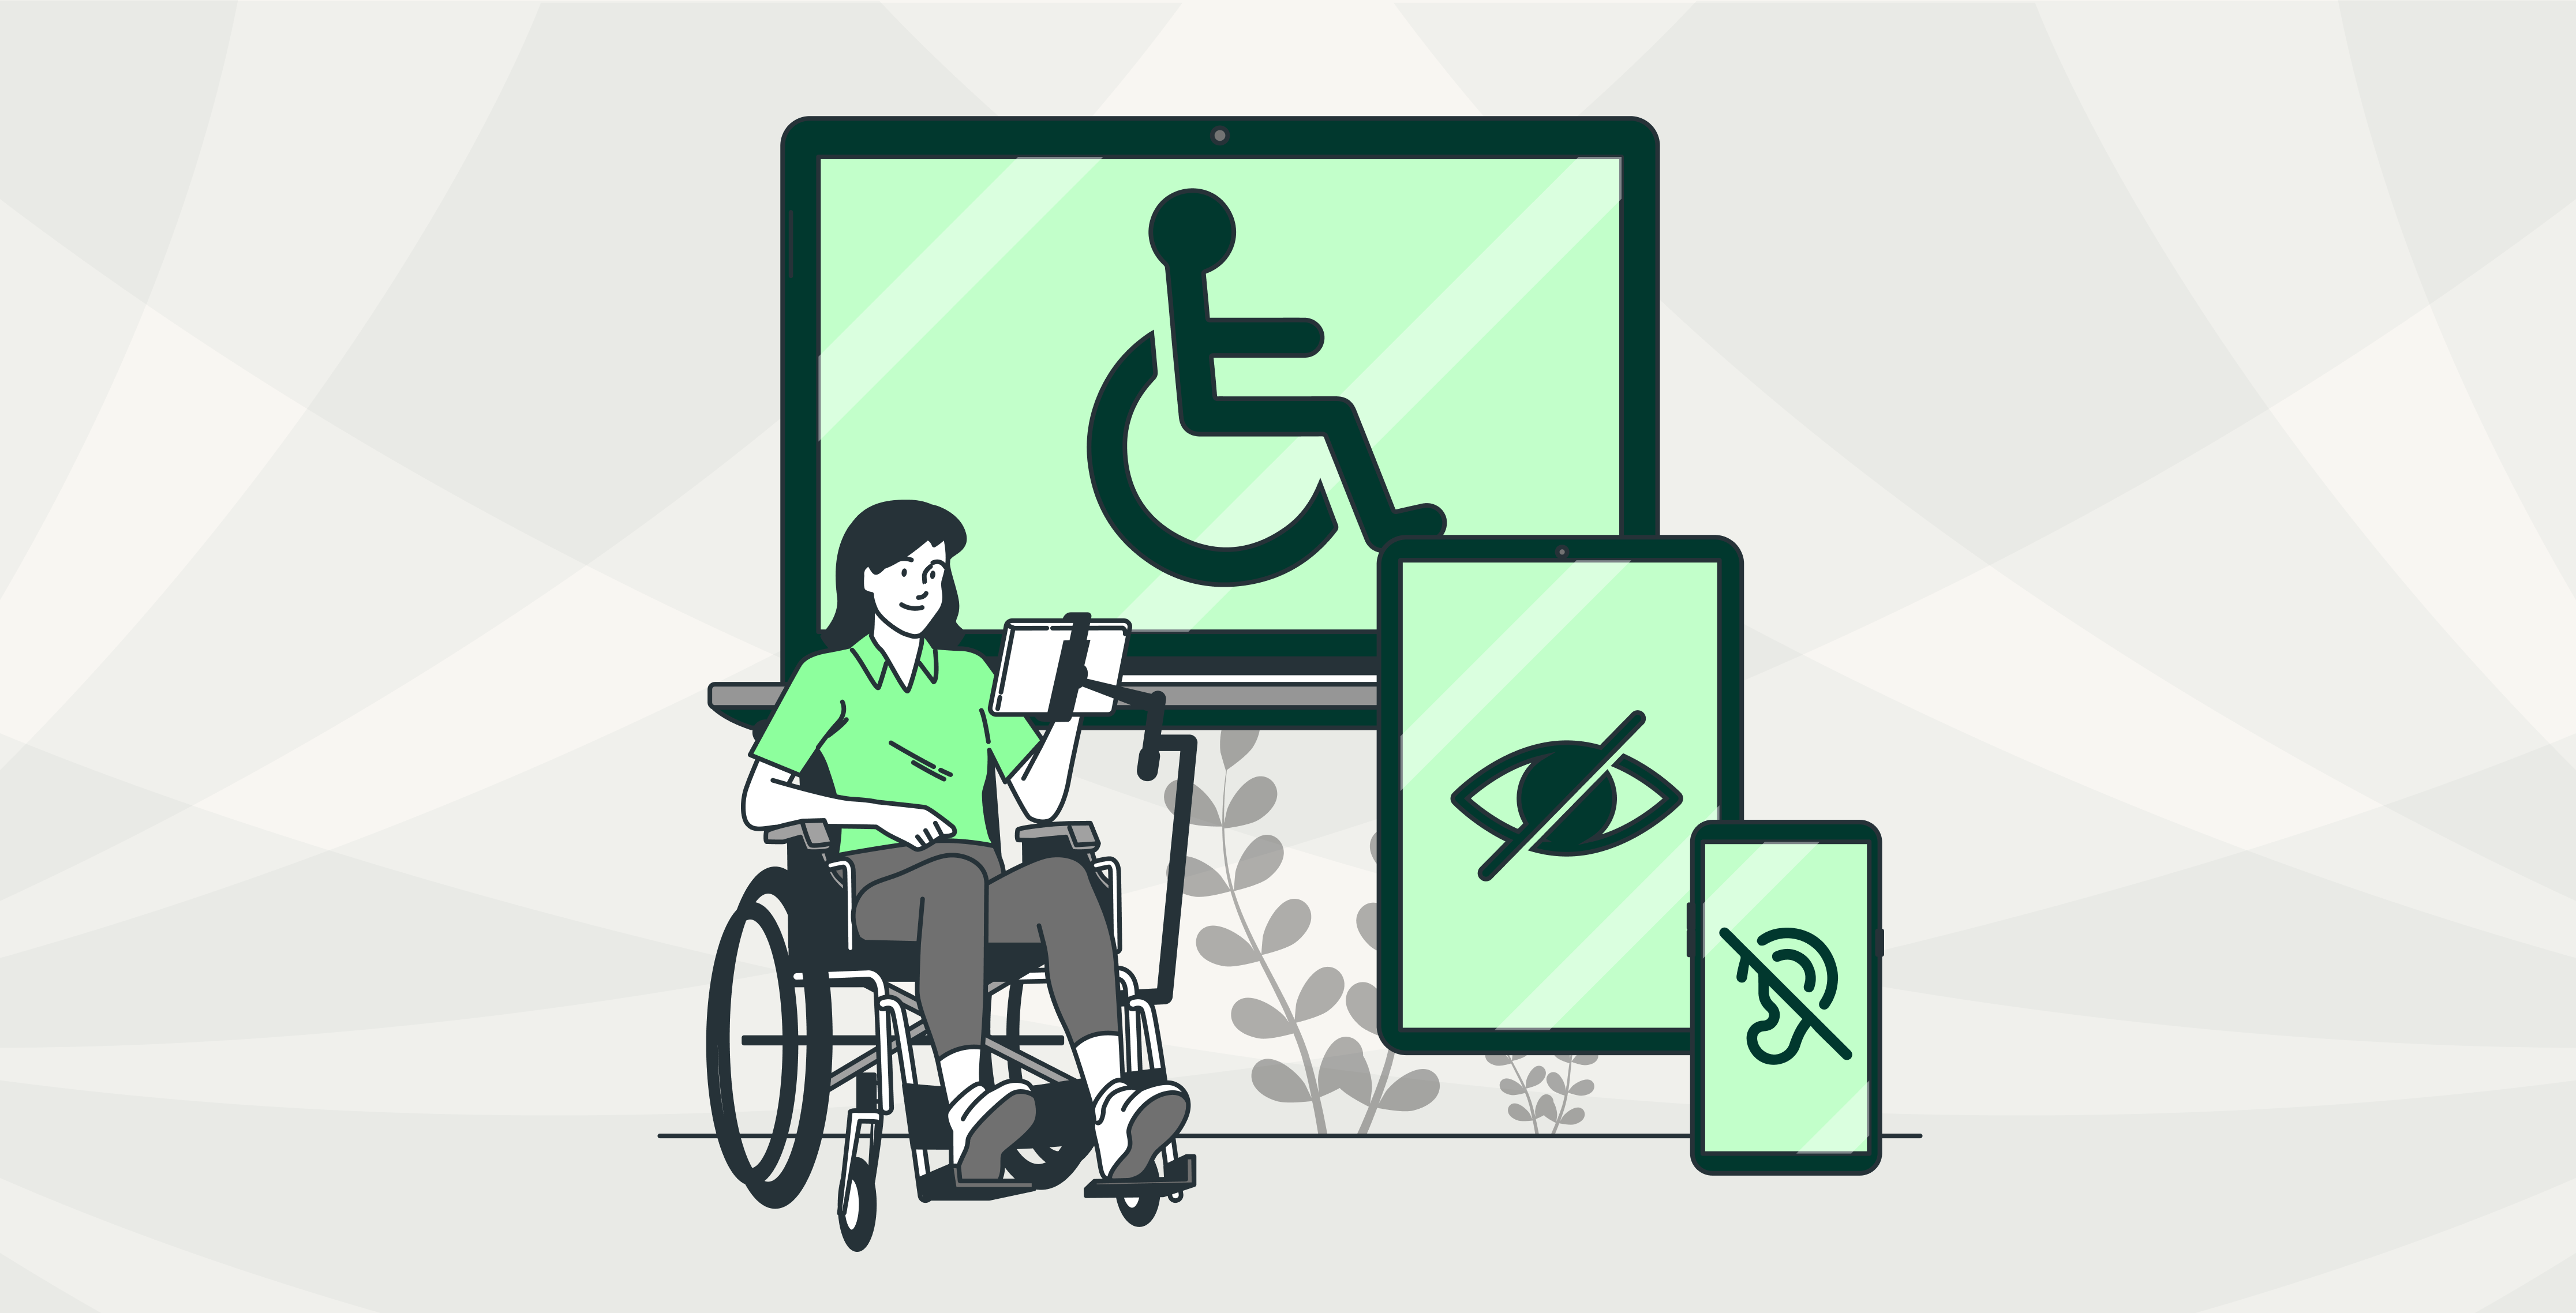 Global Mental Healthcare Solution Provider Makes Accessibility a Competitive Advantage